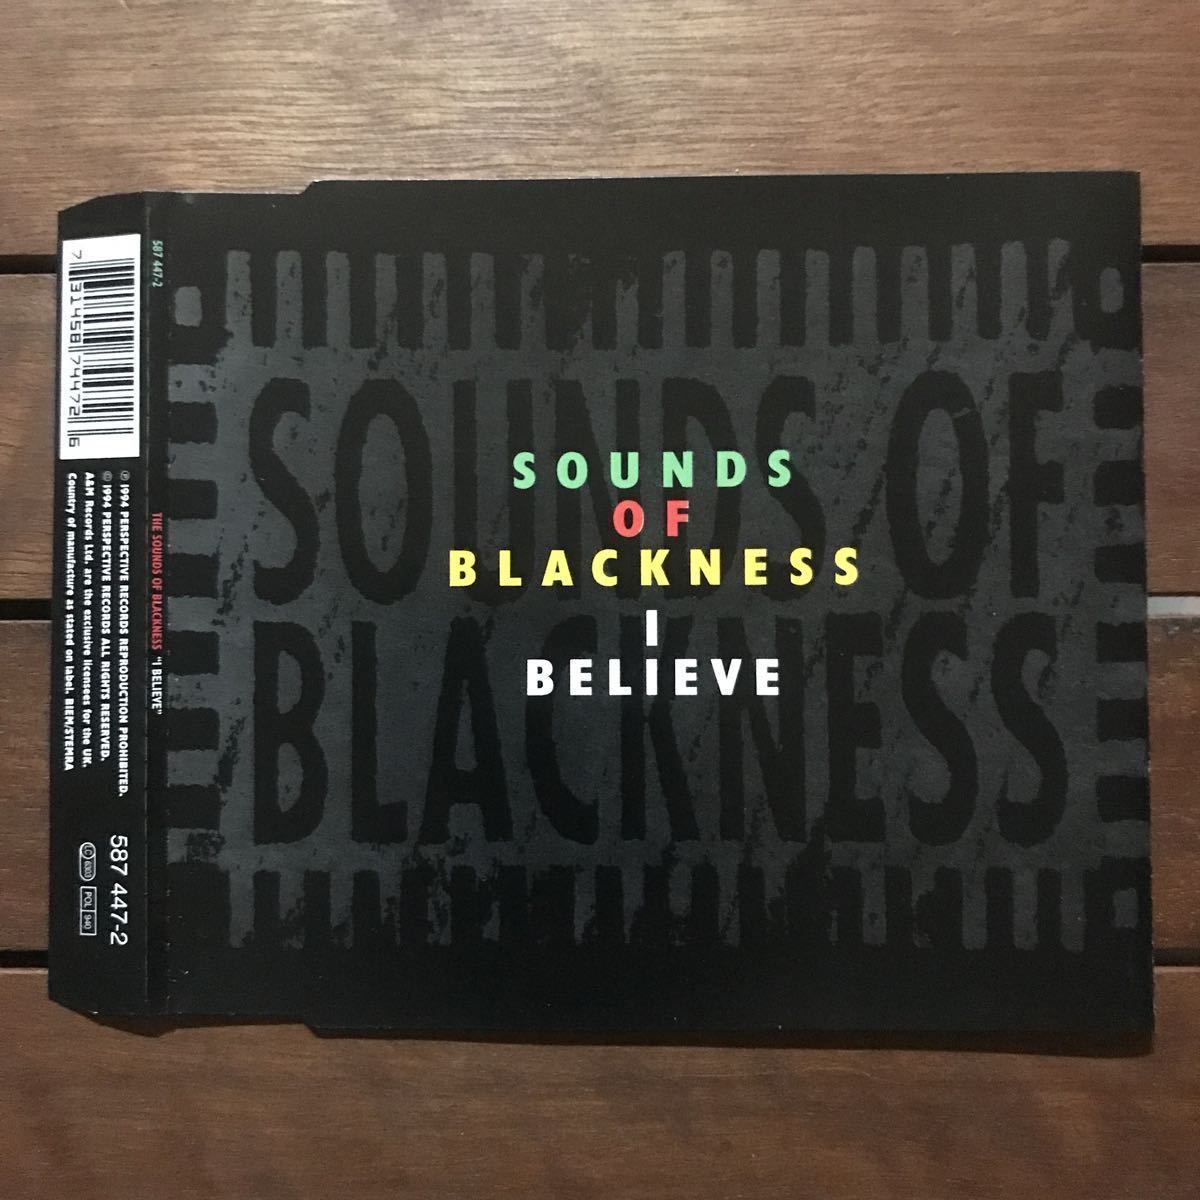 【r&b】The Sounds Of Blackness / I Believe［CDs］《9f042 9595》_画像1